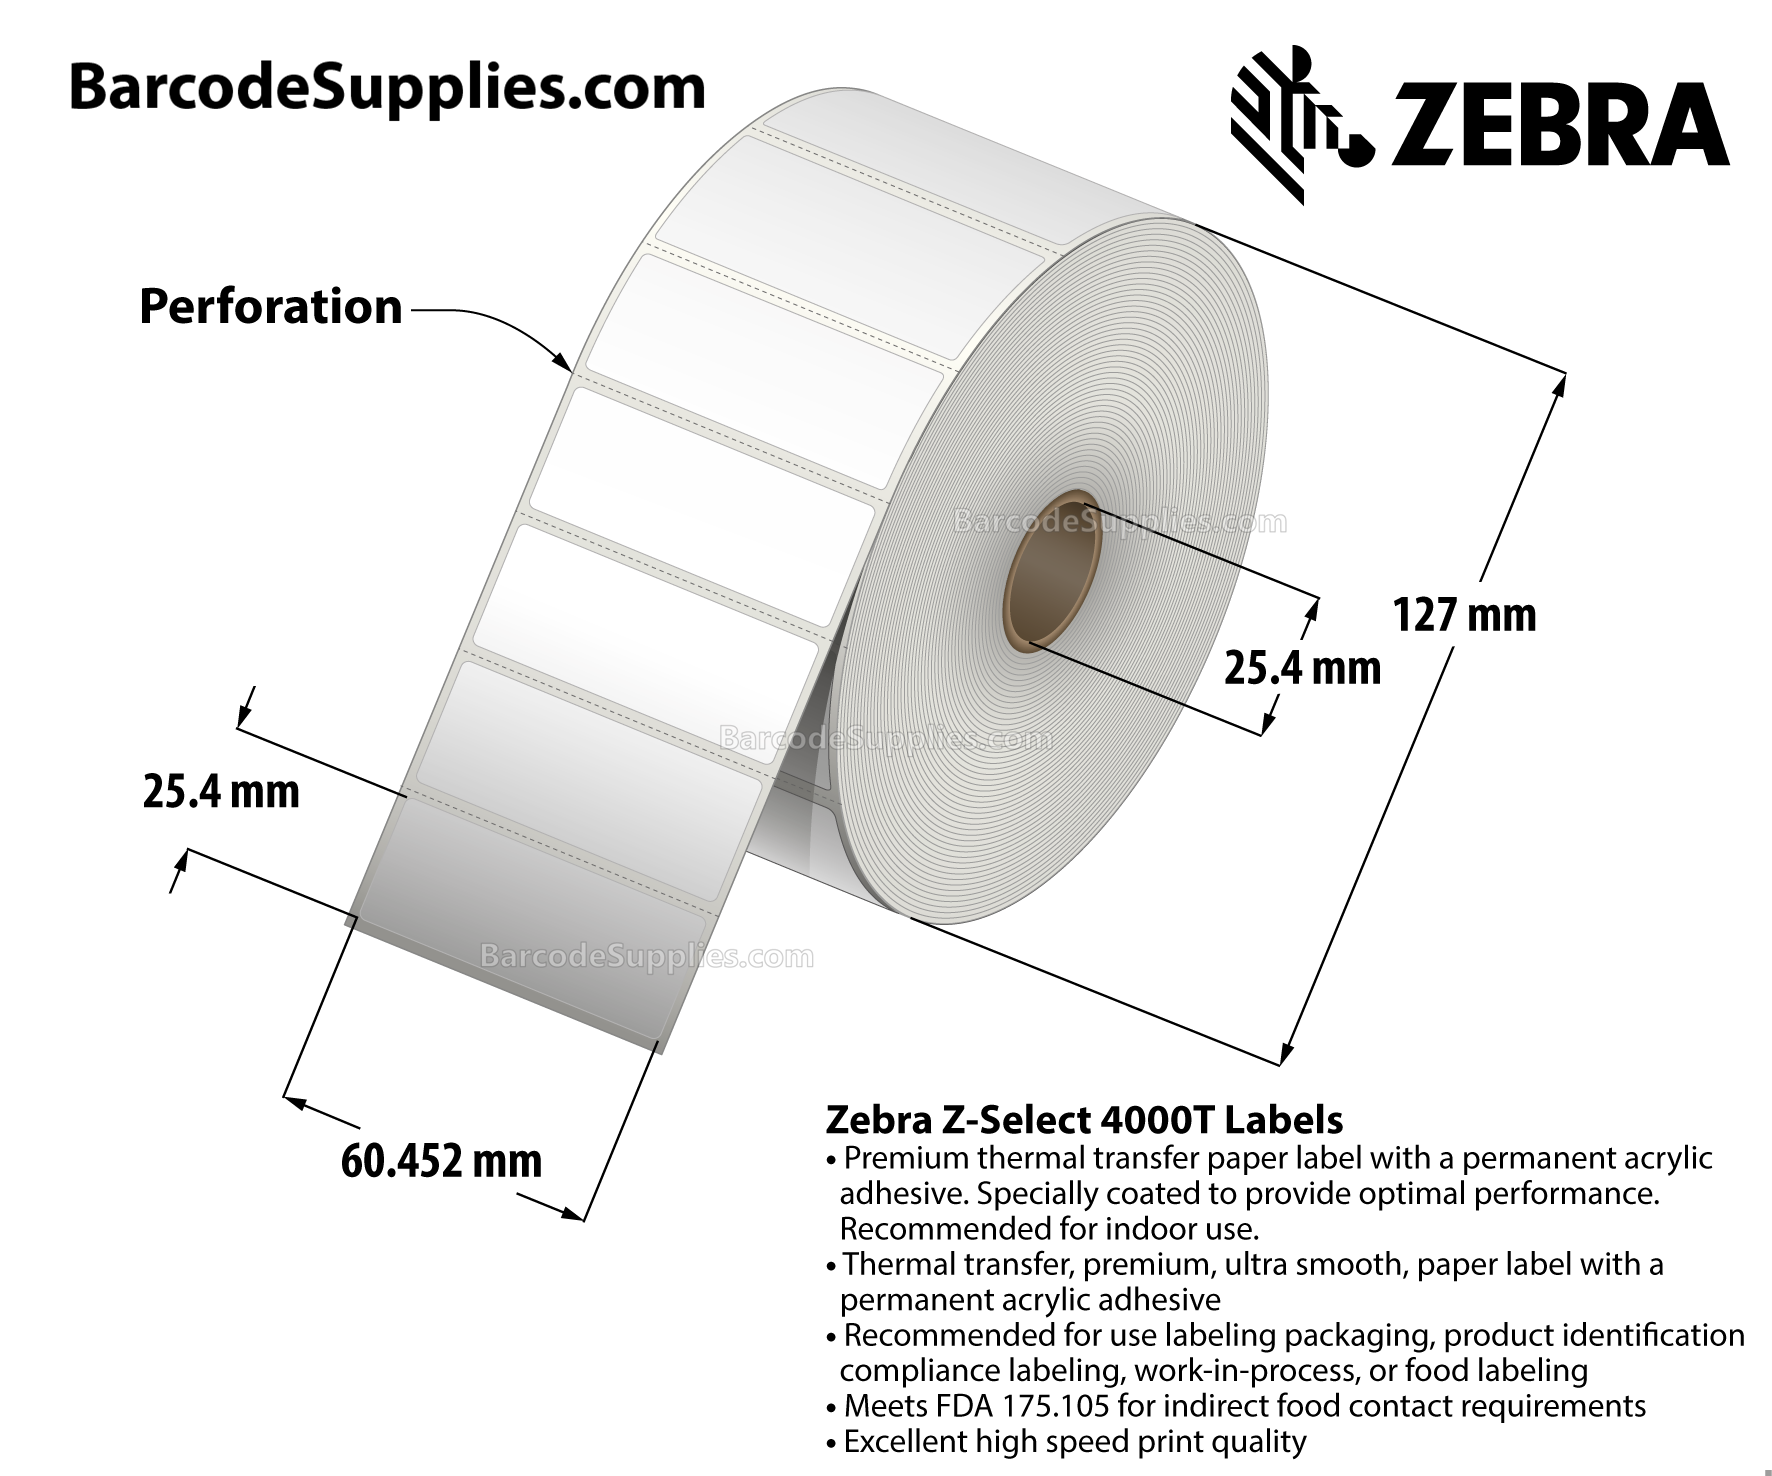 2.38 x 1 Thermal Transfer White Z-Select 4000T Labels With Permanent Adhesive - Labels have center vertical slit creating two 1.1875" x 1" labels - Perforated - 2580 Labels Per Roll - Carton Of 6 Rolls - 15480 Labels Total - MPN: 10005848